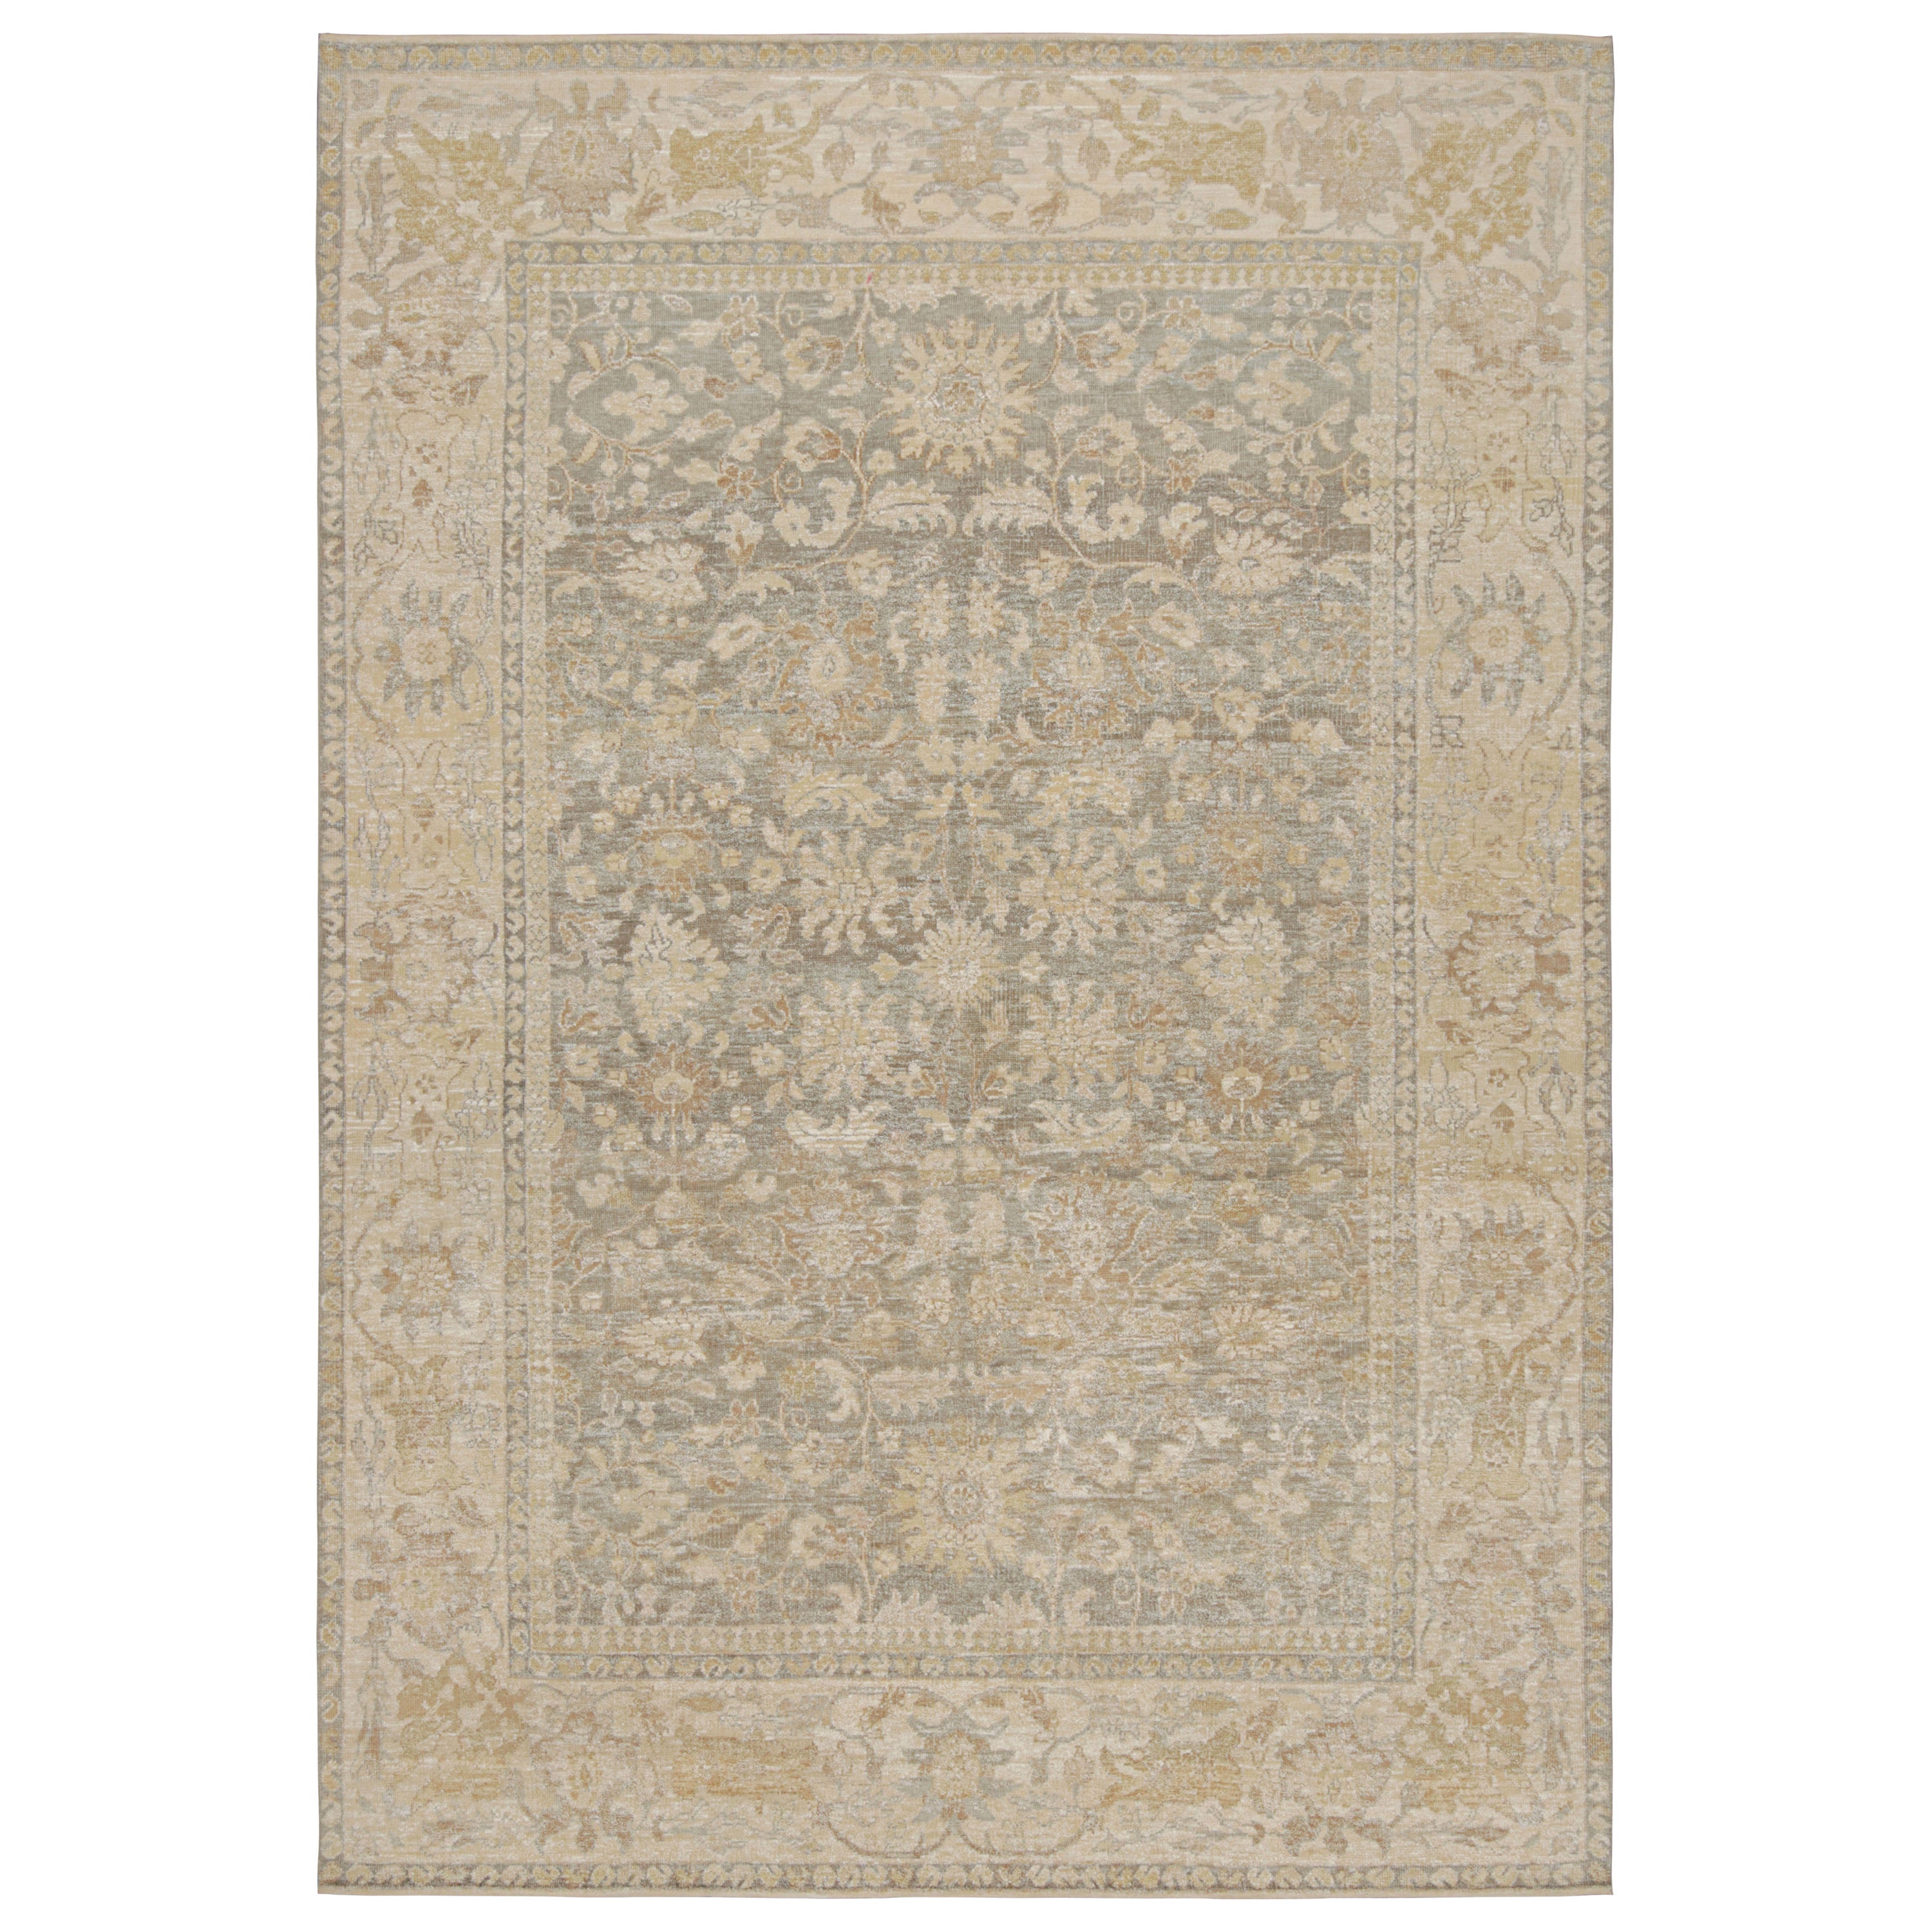 Rug & Kilim’s Oushak Style Rug in Beige-Brown, Gray Floral Patterns For Sale